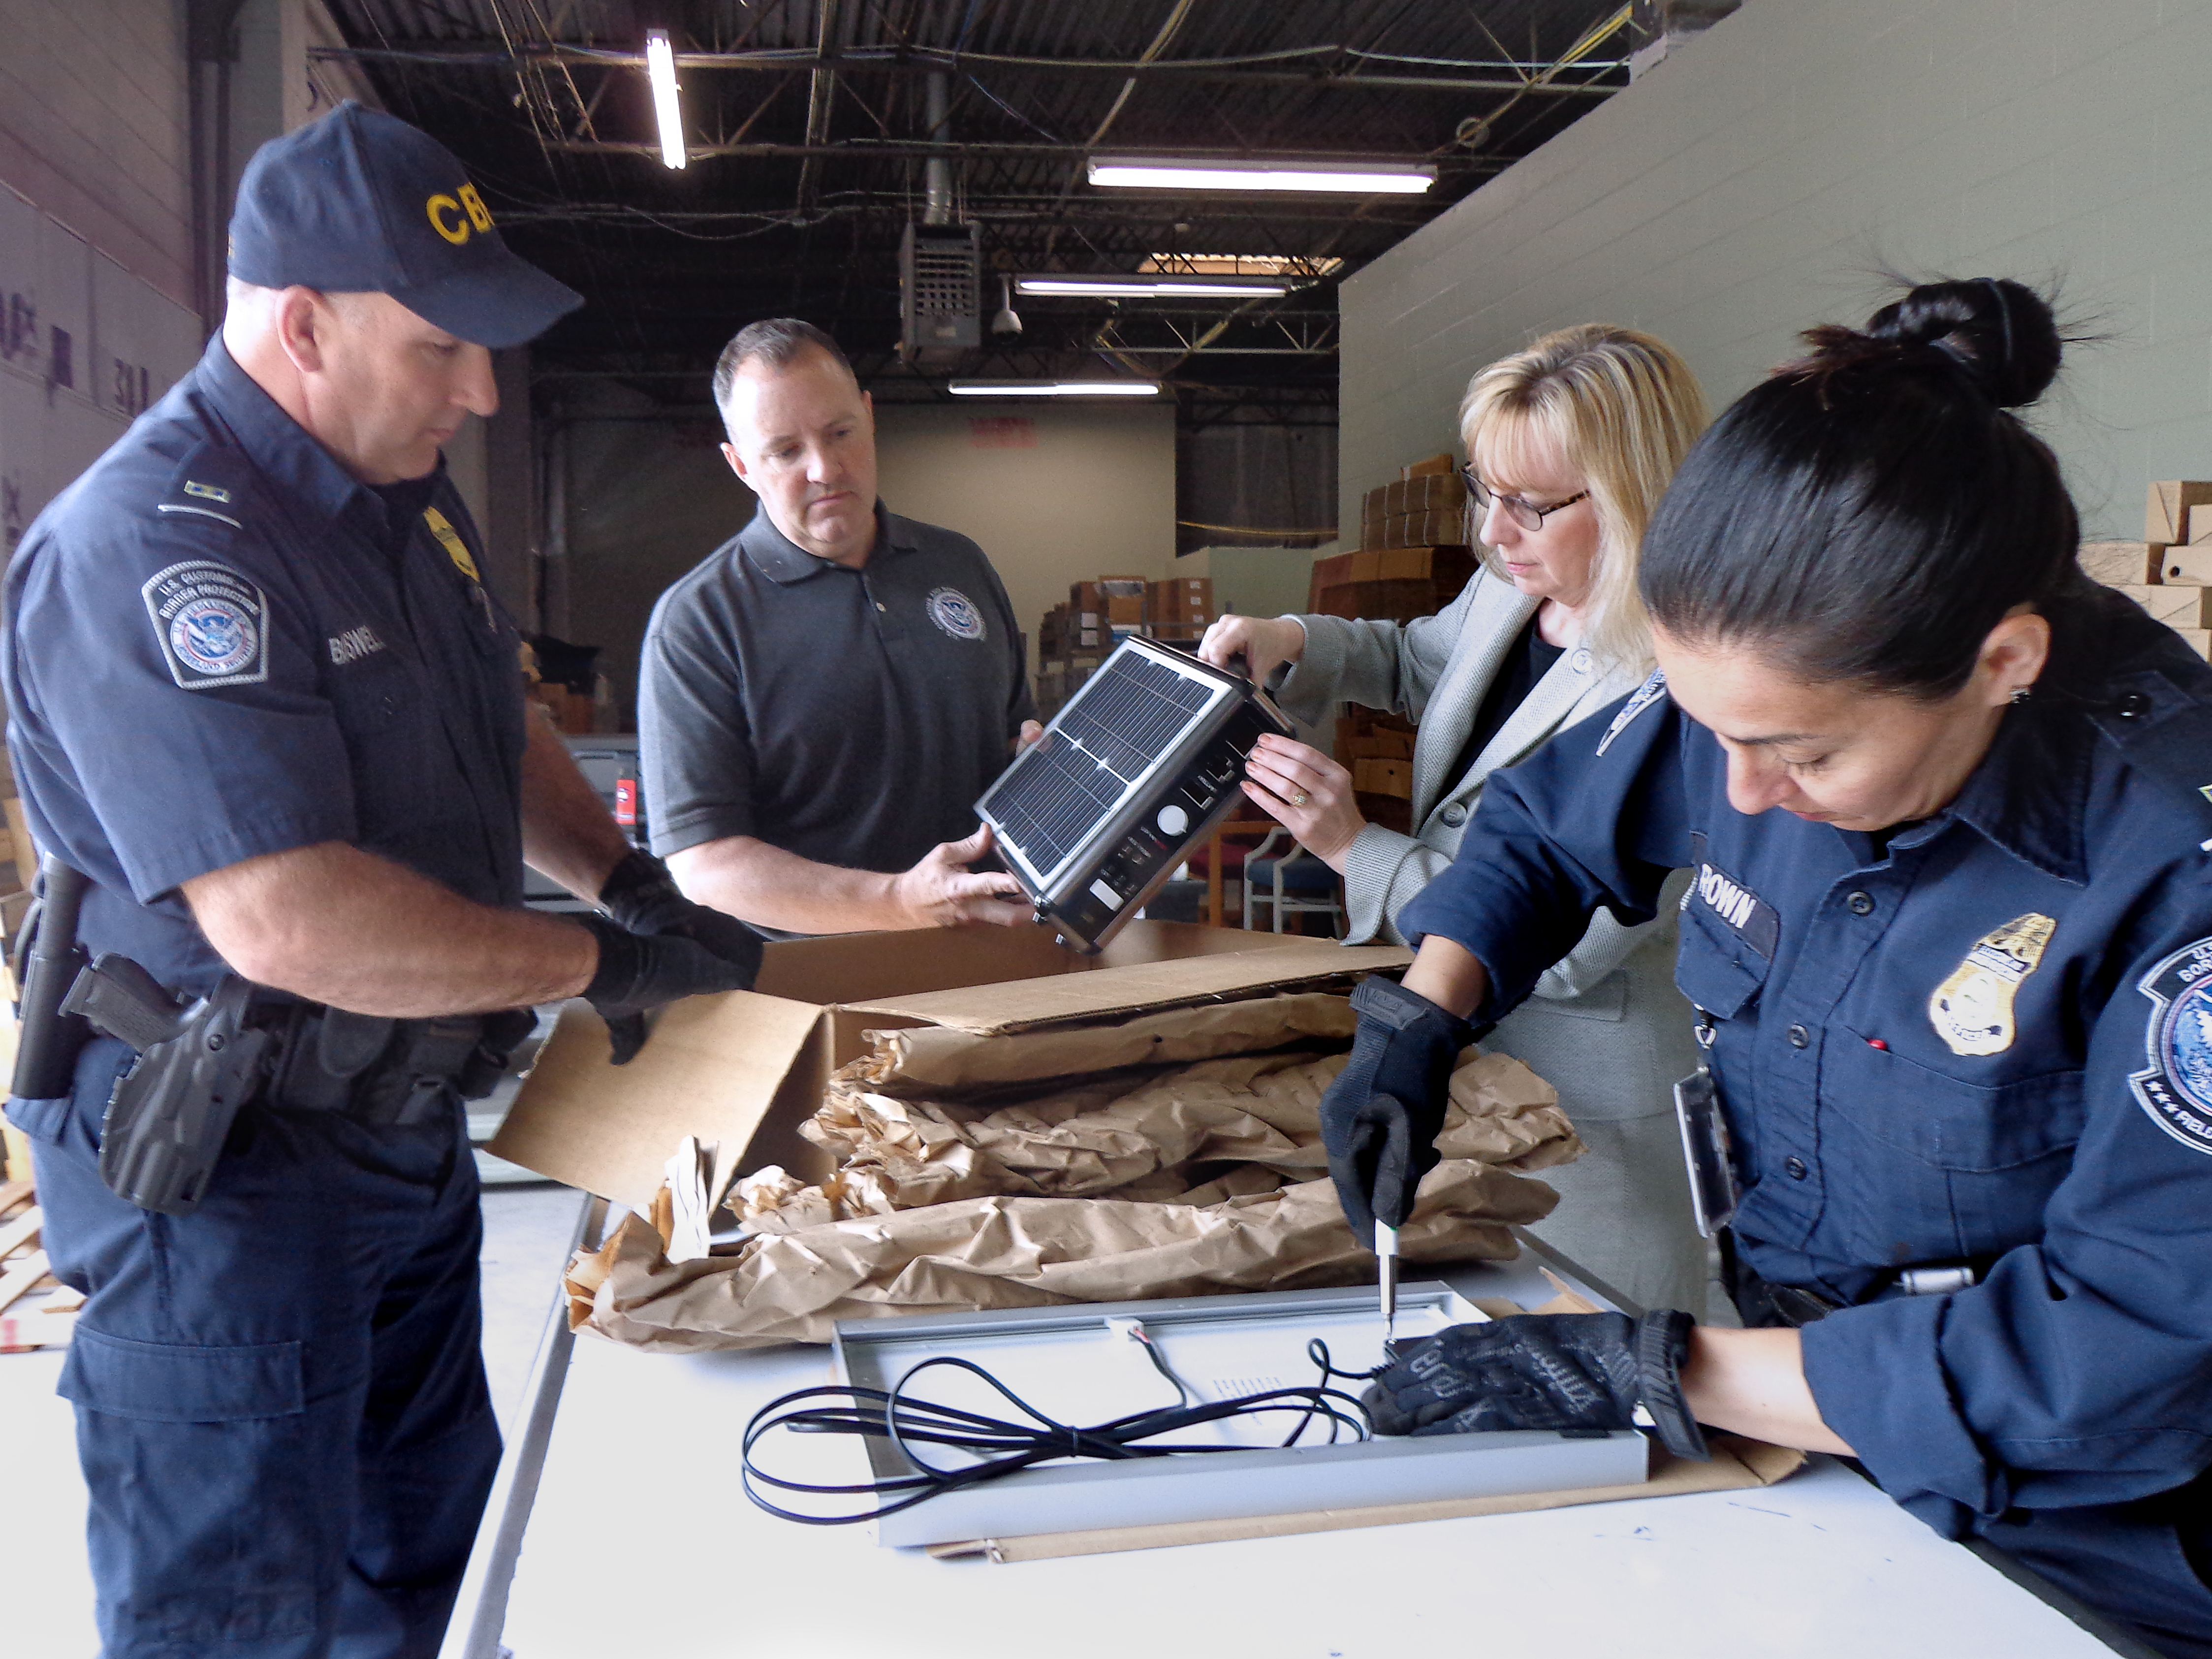 As part of Operation Solar Flare at the port of Charlotte in North Carolina, l-r, CBP Officer Robert Boswell, Import Specialist Jeff Sorrells, Senior Import Specialist Laurie Pazzo, and CBP Officer Joyce Brown examine solar products from China. Photo by Scott Sams